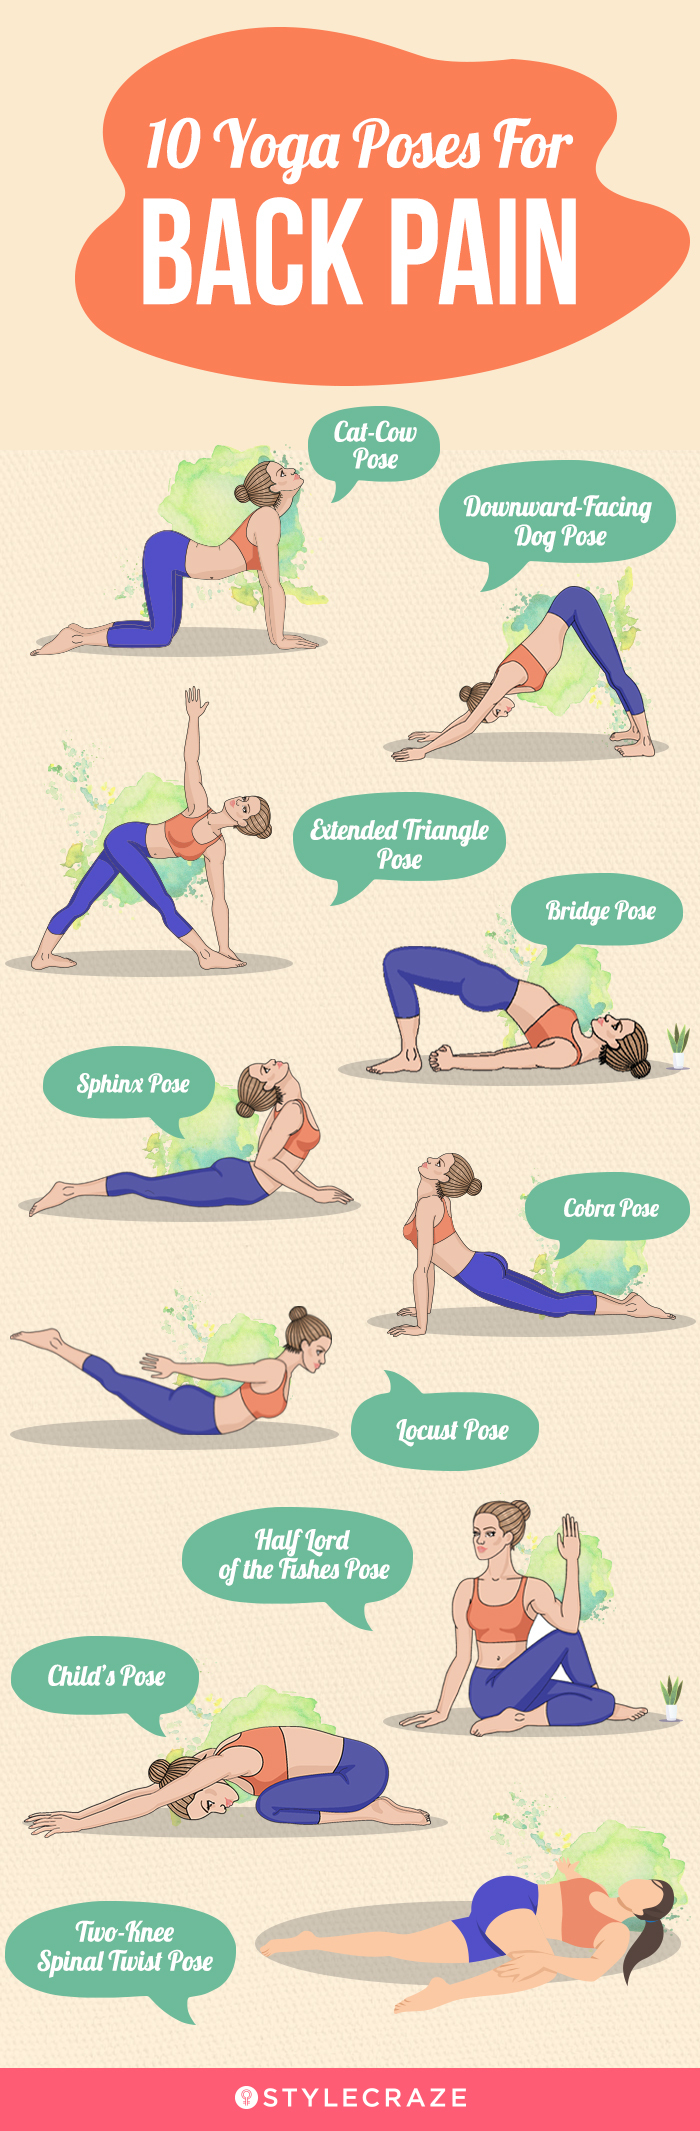 10 yoga poses for back pain (infographic)